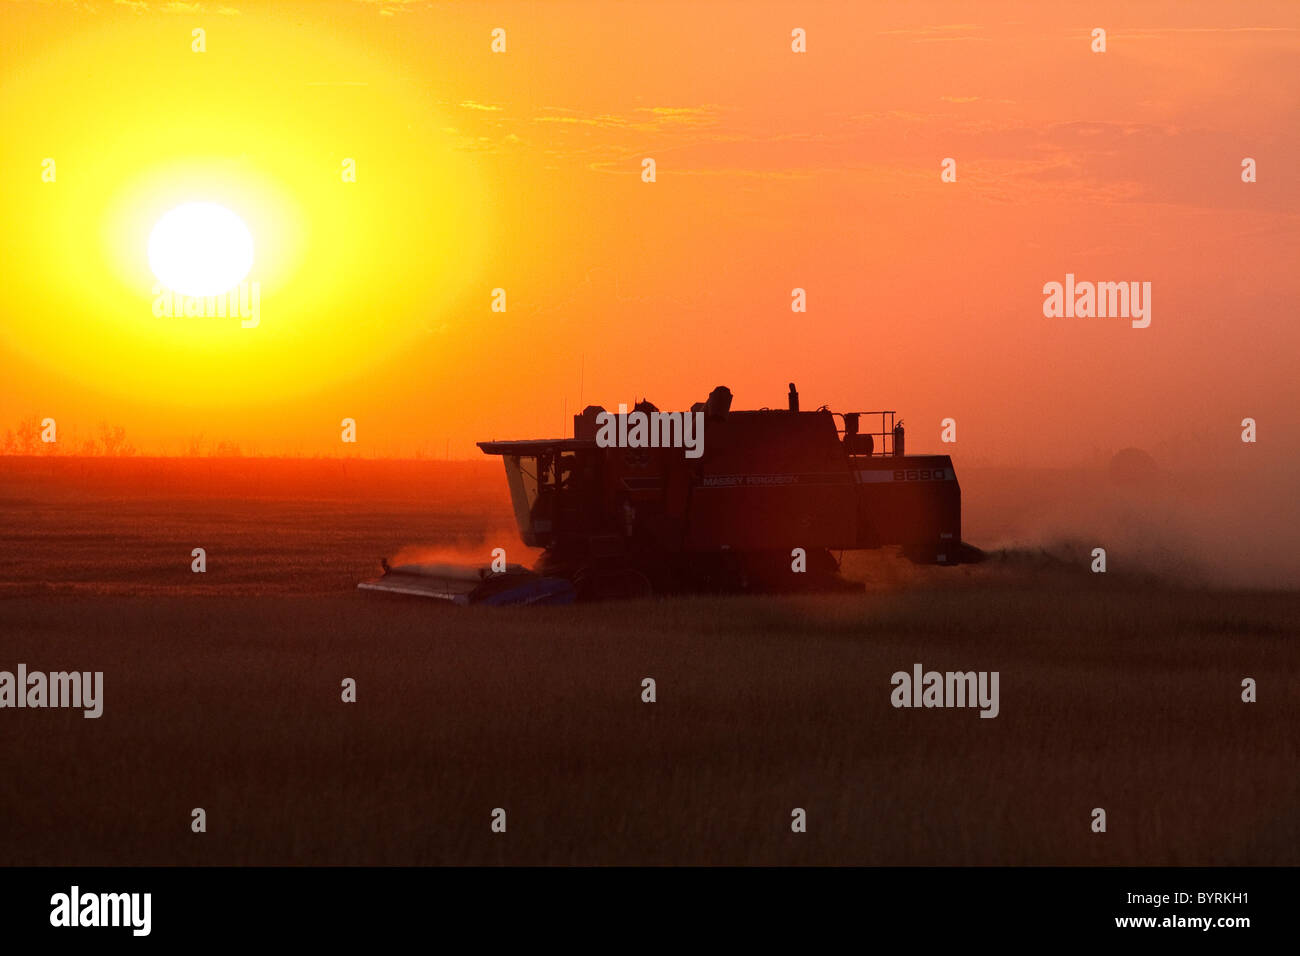 Agriculture - Silhouetted combine harvesting wheat at sunset / Alberta, Canada. Stock Photo